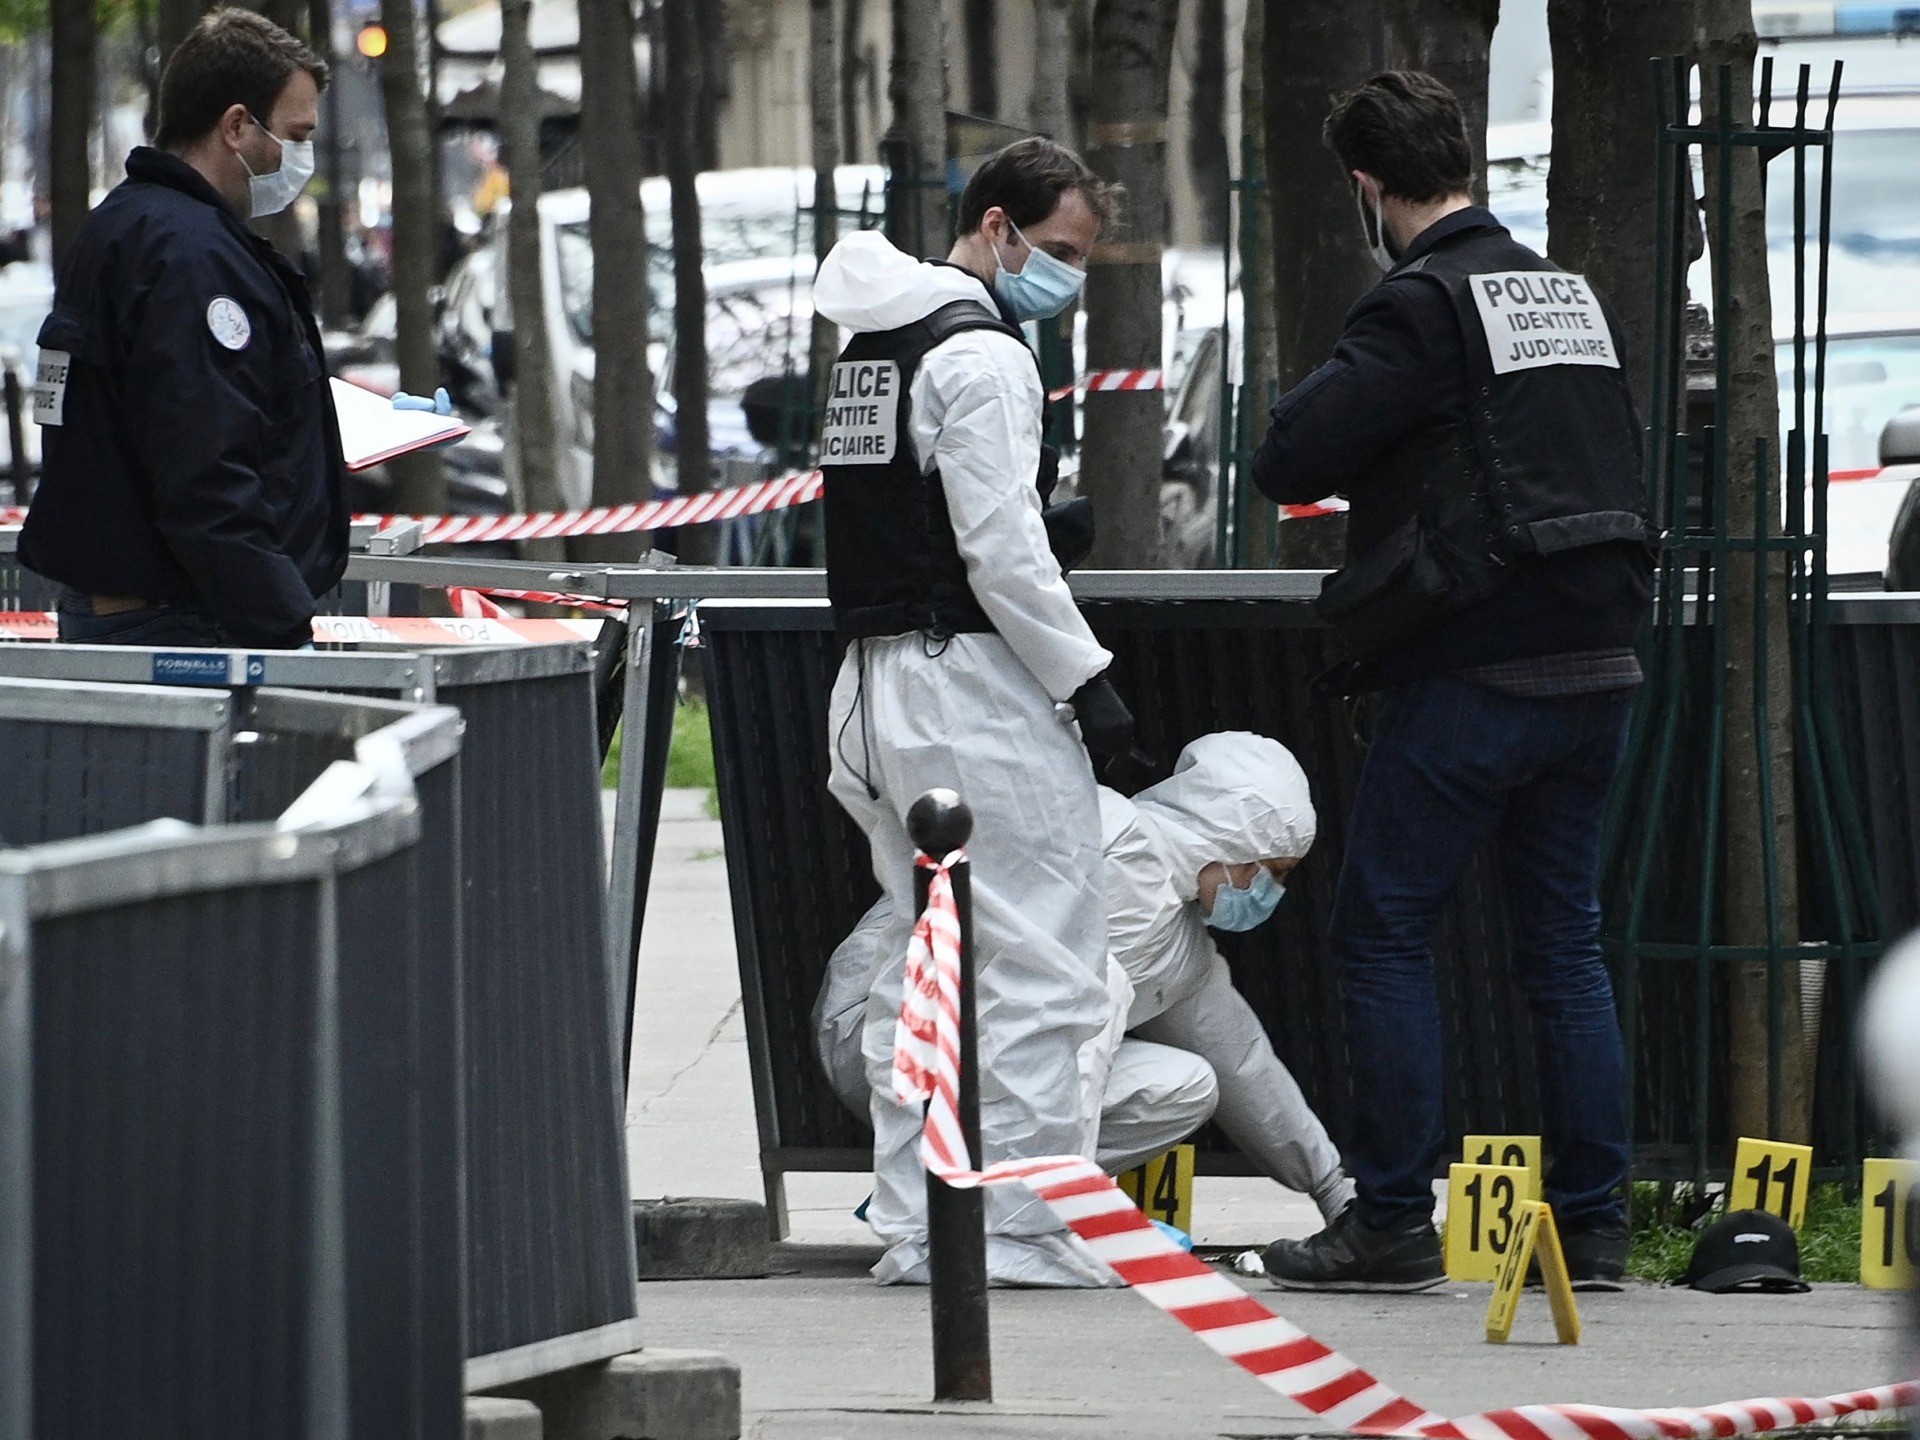 French police forensic investigators search for evidence near the Henry Dunant private hospital where one person was shot dead and one injured in a shooting outside the instituion owned by the Red Cross in Paris' upmarket 16th district on April 12, 2021. (Photo by Anne-Christine POUJOULAT / AFP) (Photo by ANNE-CHRISTINE POUJOULAT/AFP via Getty Images)